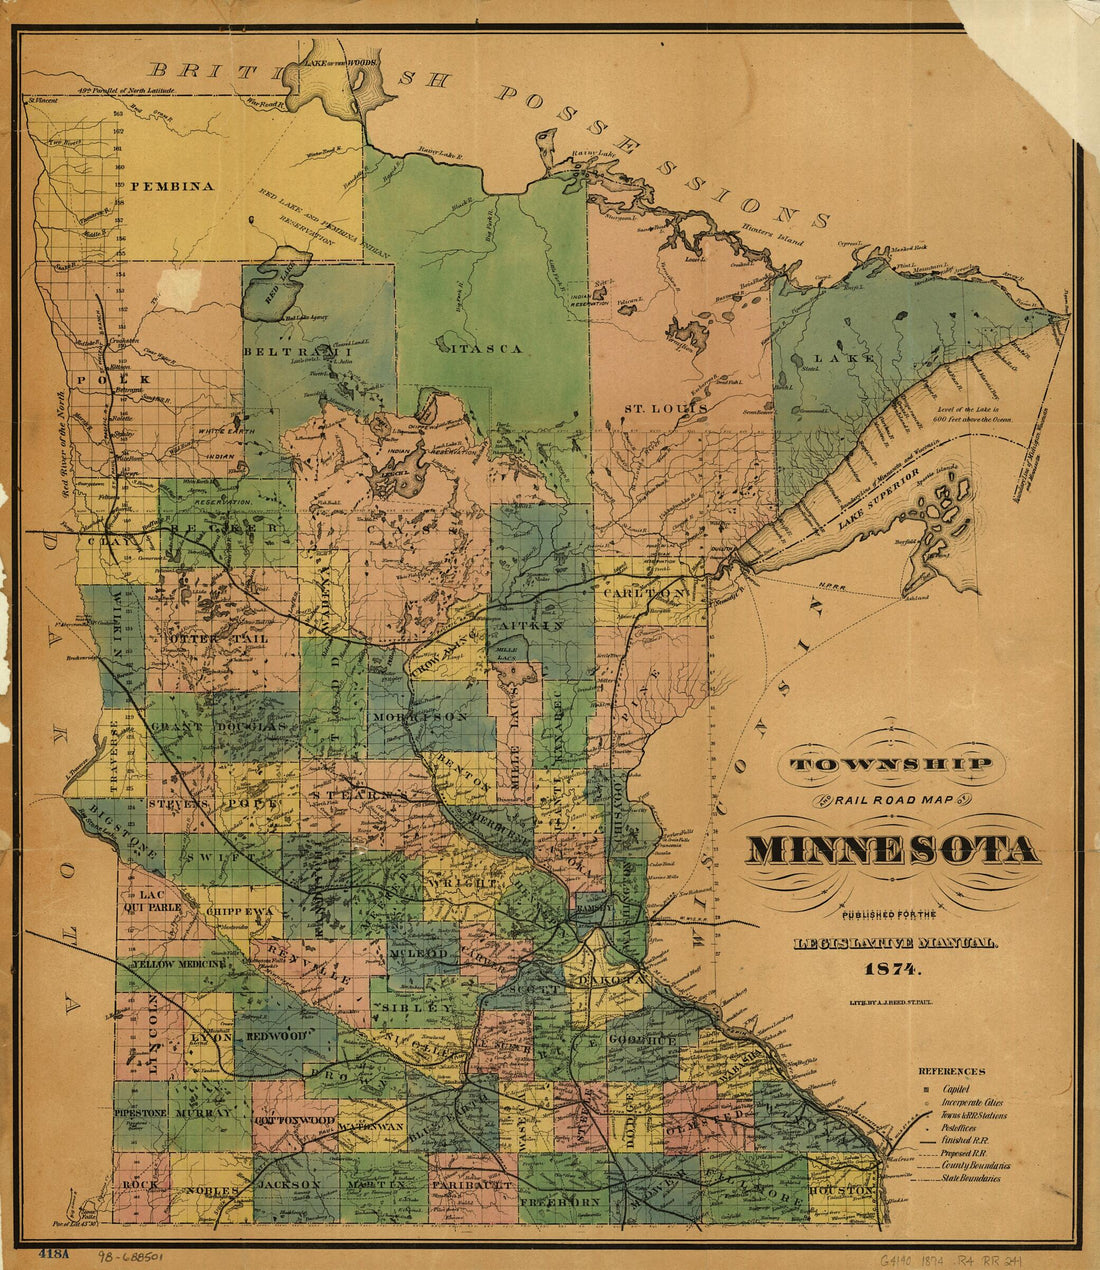 This old map of Township and Railroad Map of Minnesota Published for the Legislative Manual, from 1874 was created by A. J. Reed in 1874